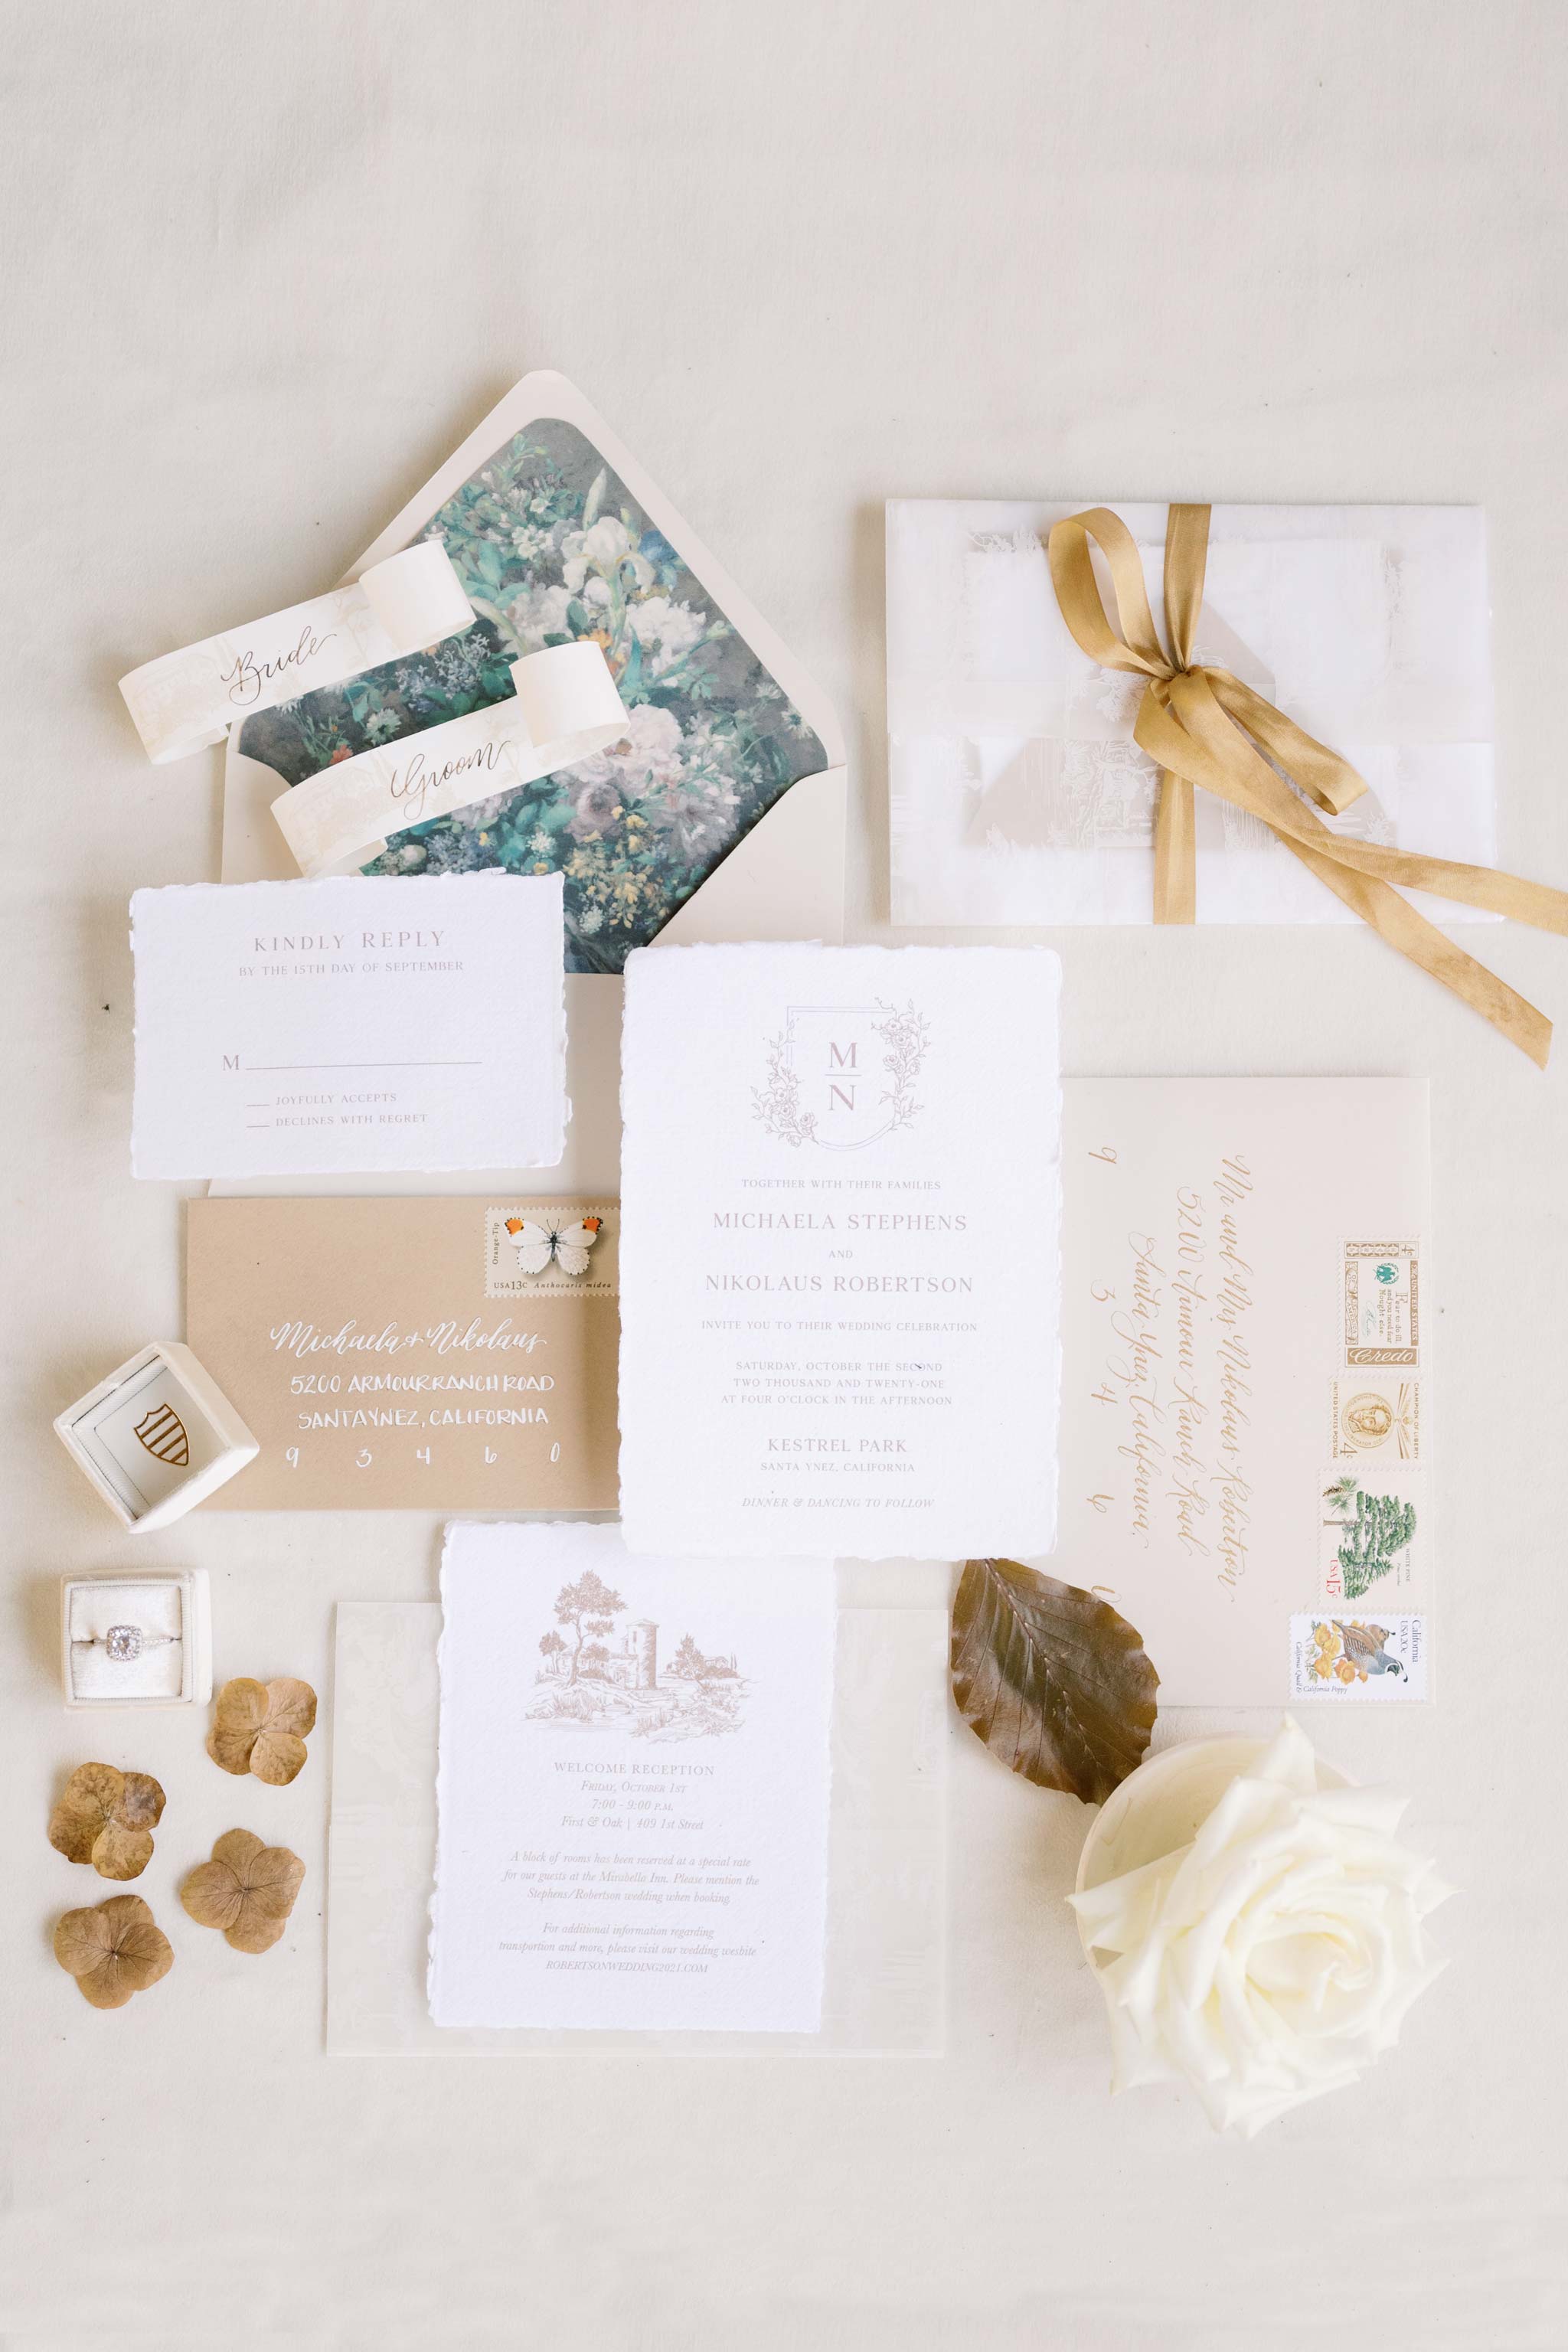 Wedding stationary suite by Kate Wisemen Creative